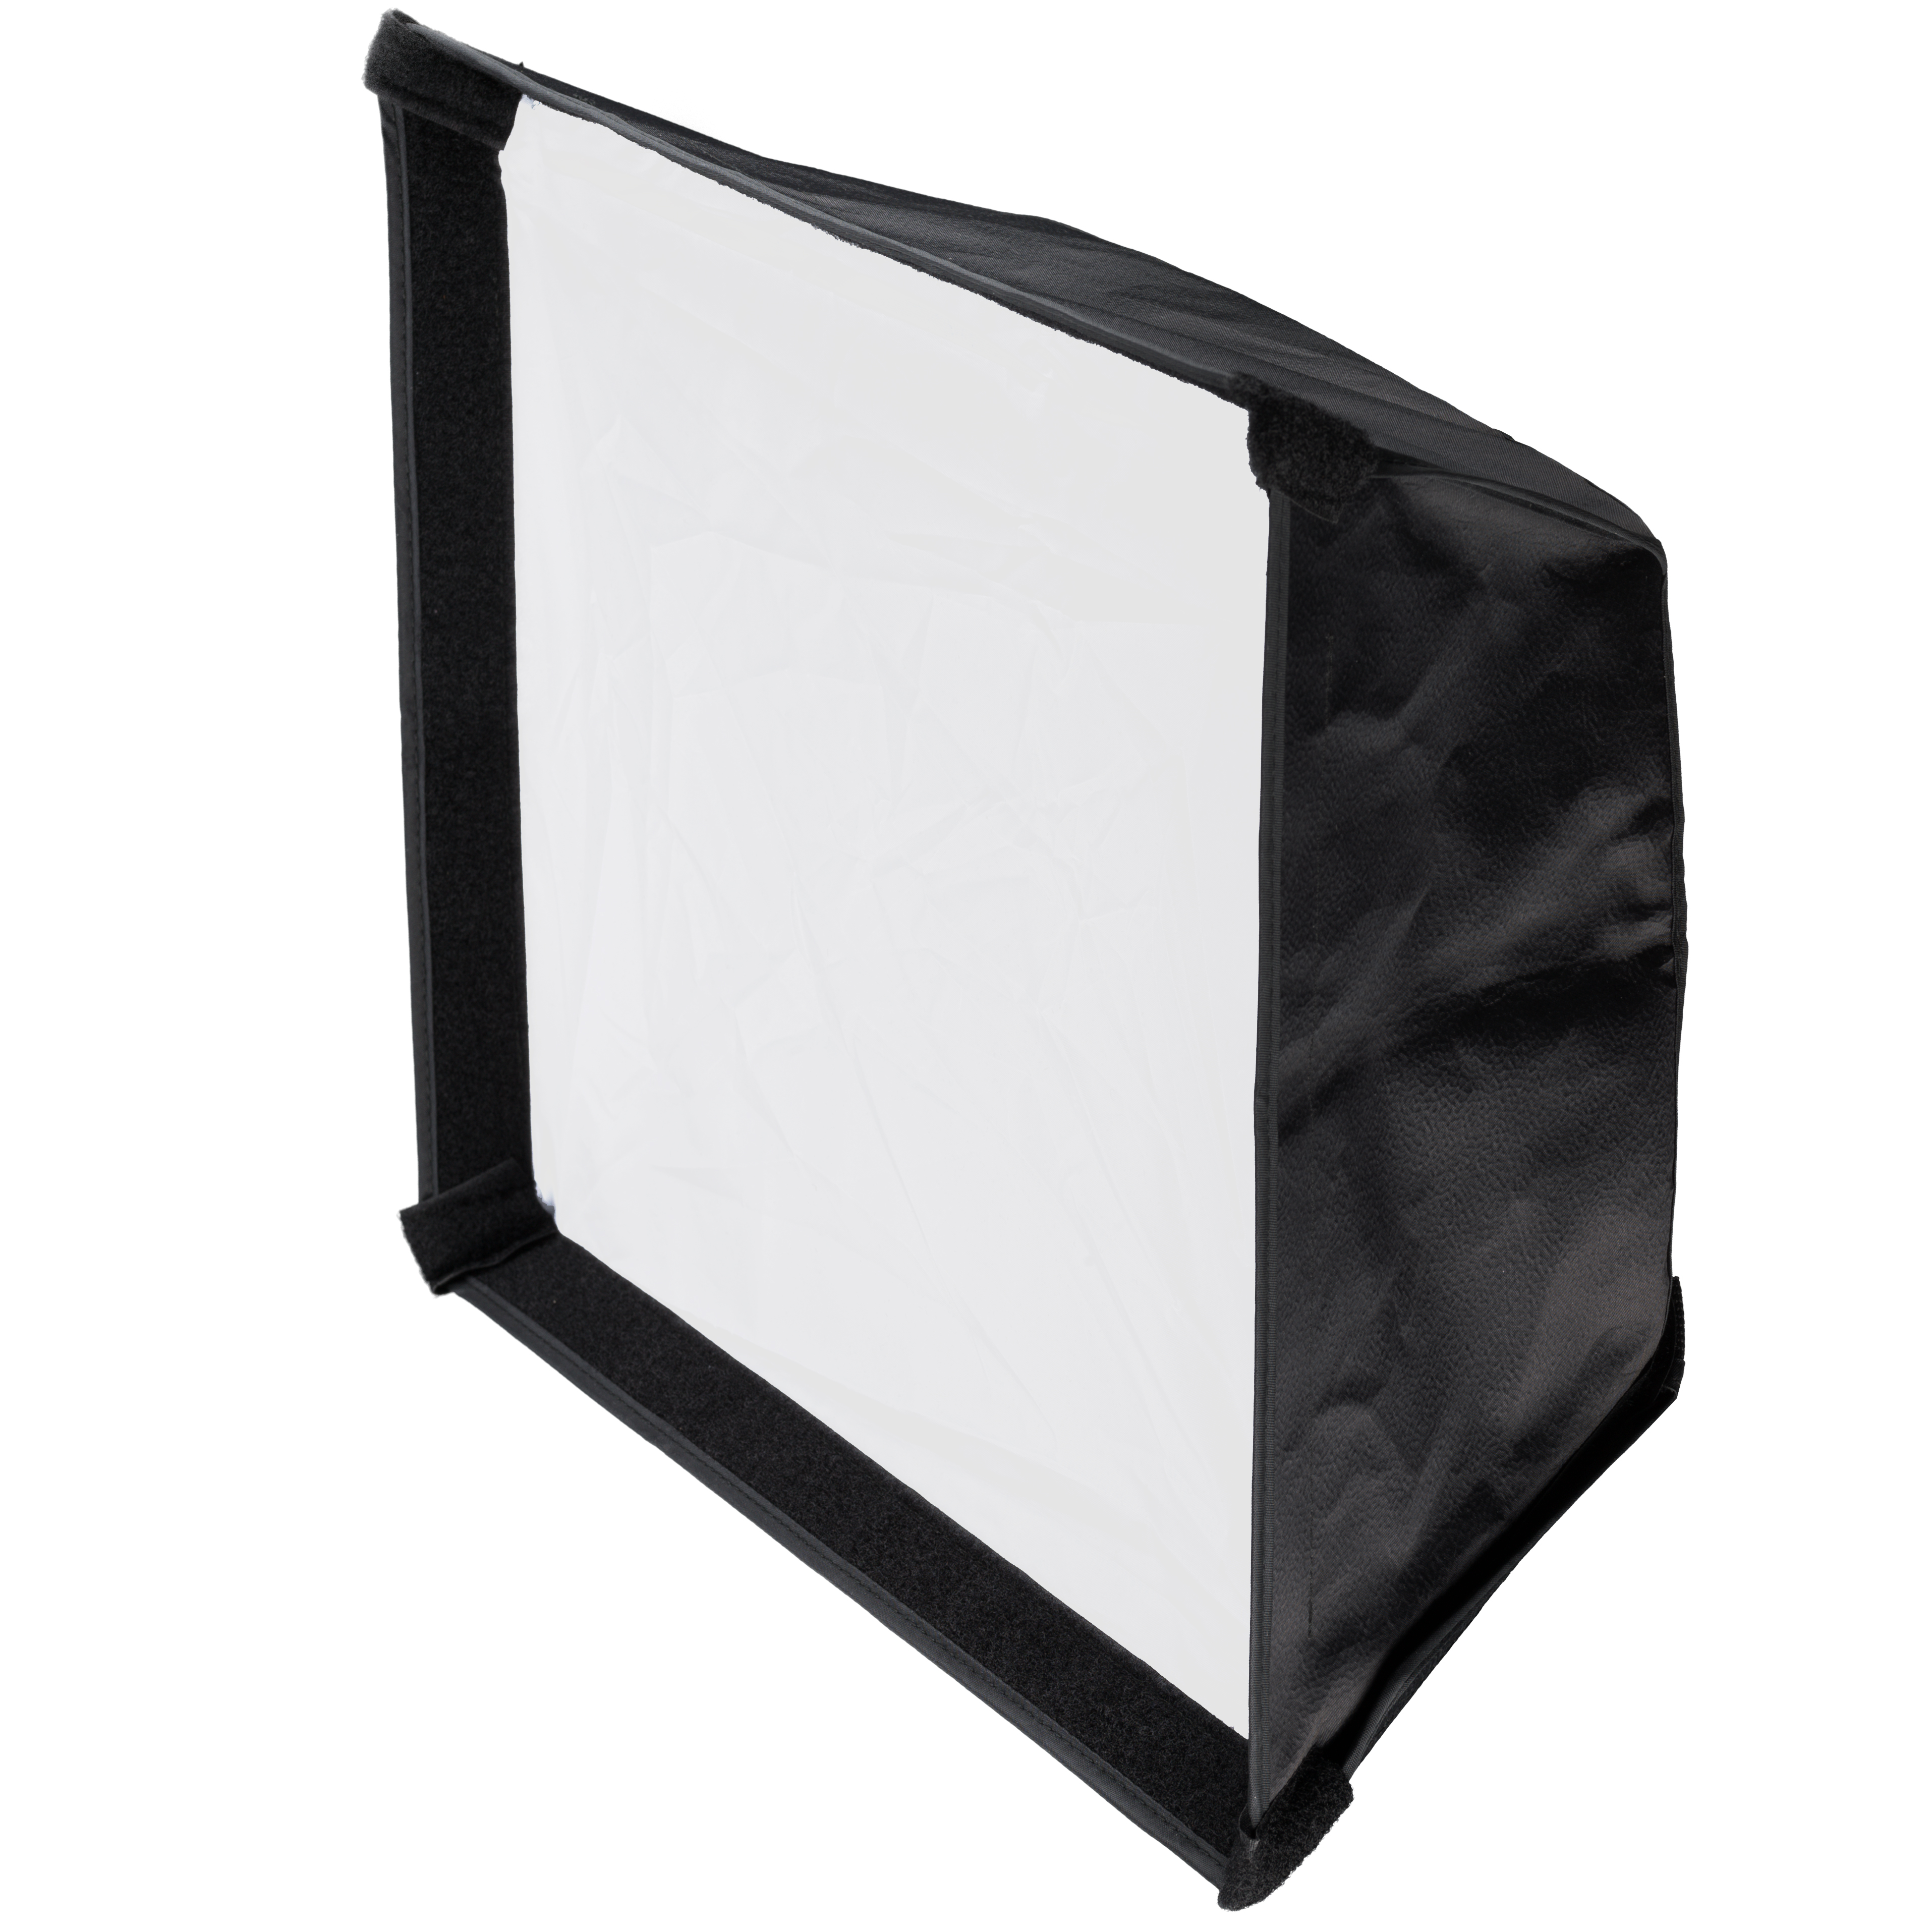 BRESSER Softbox and Honeycomb Grid for BR-S60B PRO Bi-Colour LED Panel Lamp 60W